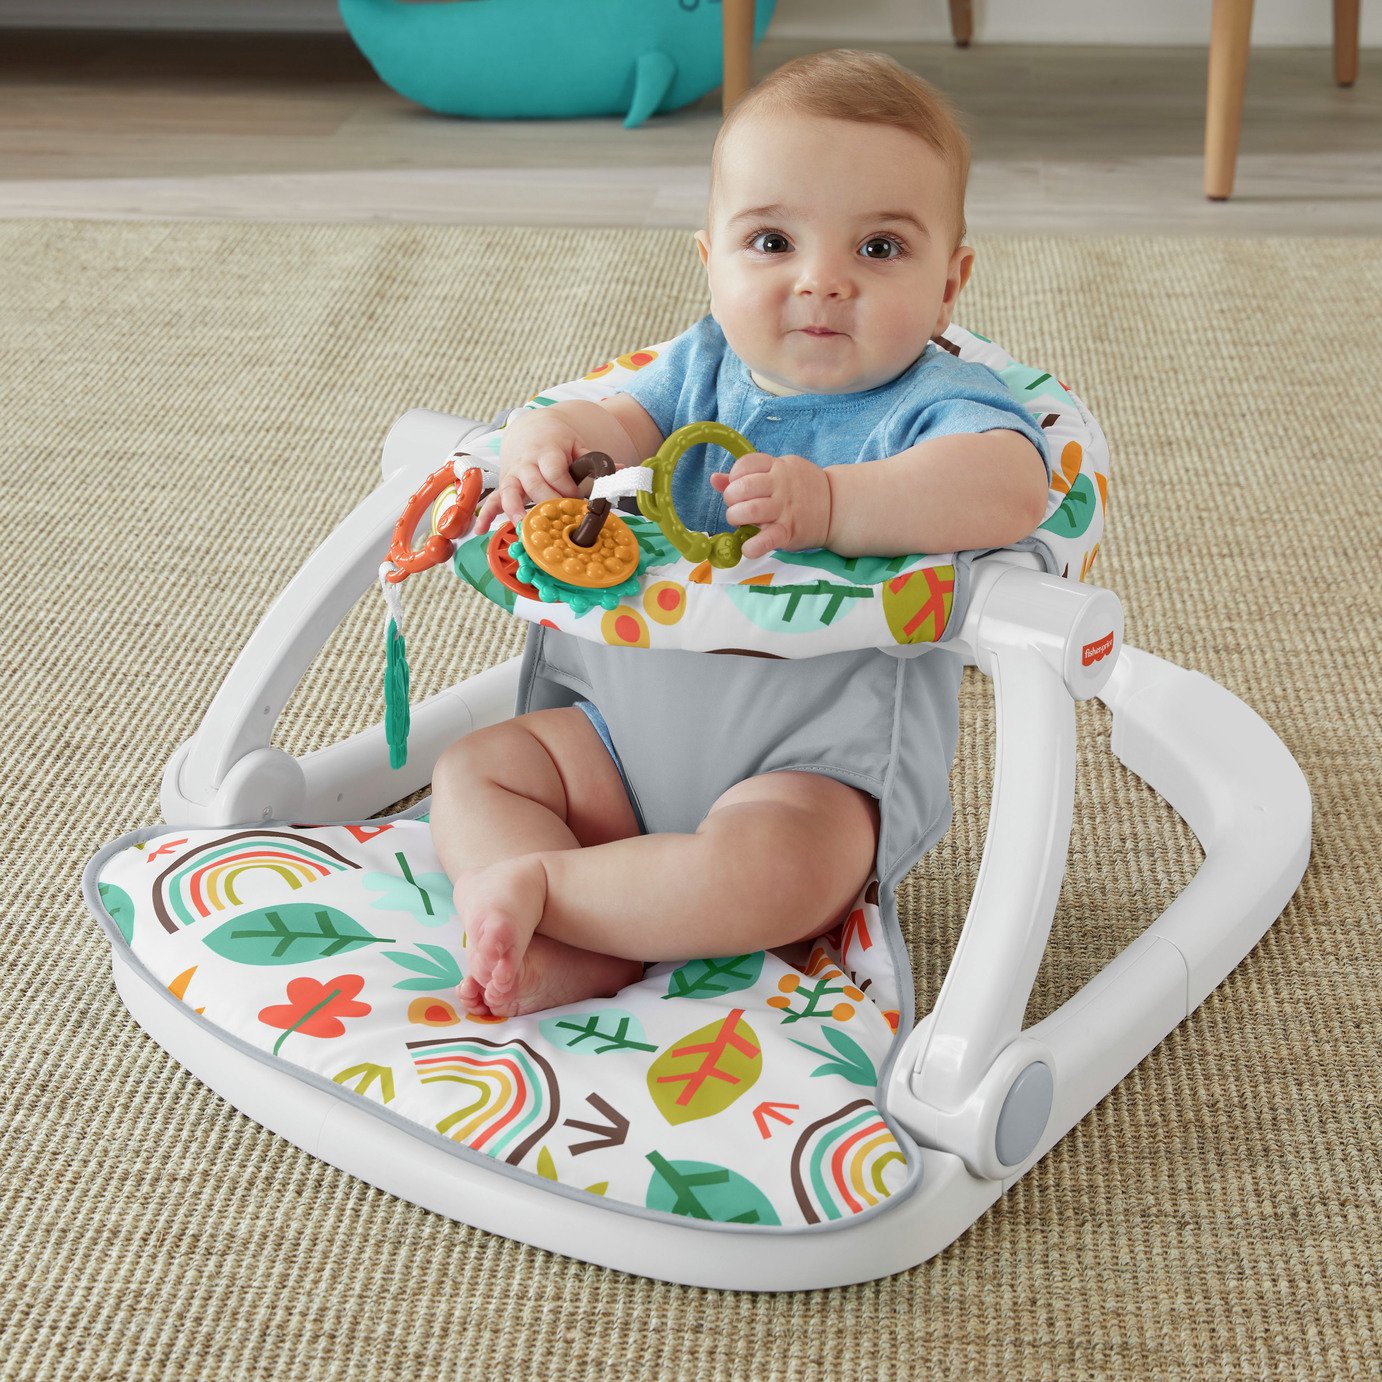 Fisher-Price Whimsical Forest Sit-Me-Up Floor Seat